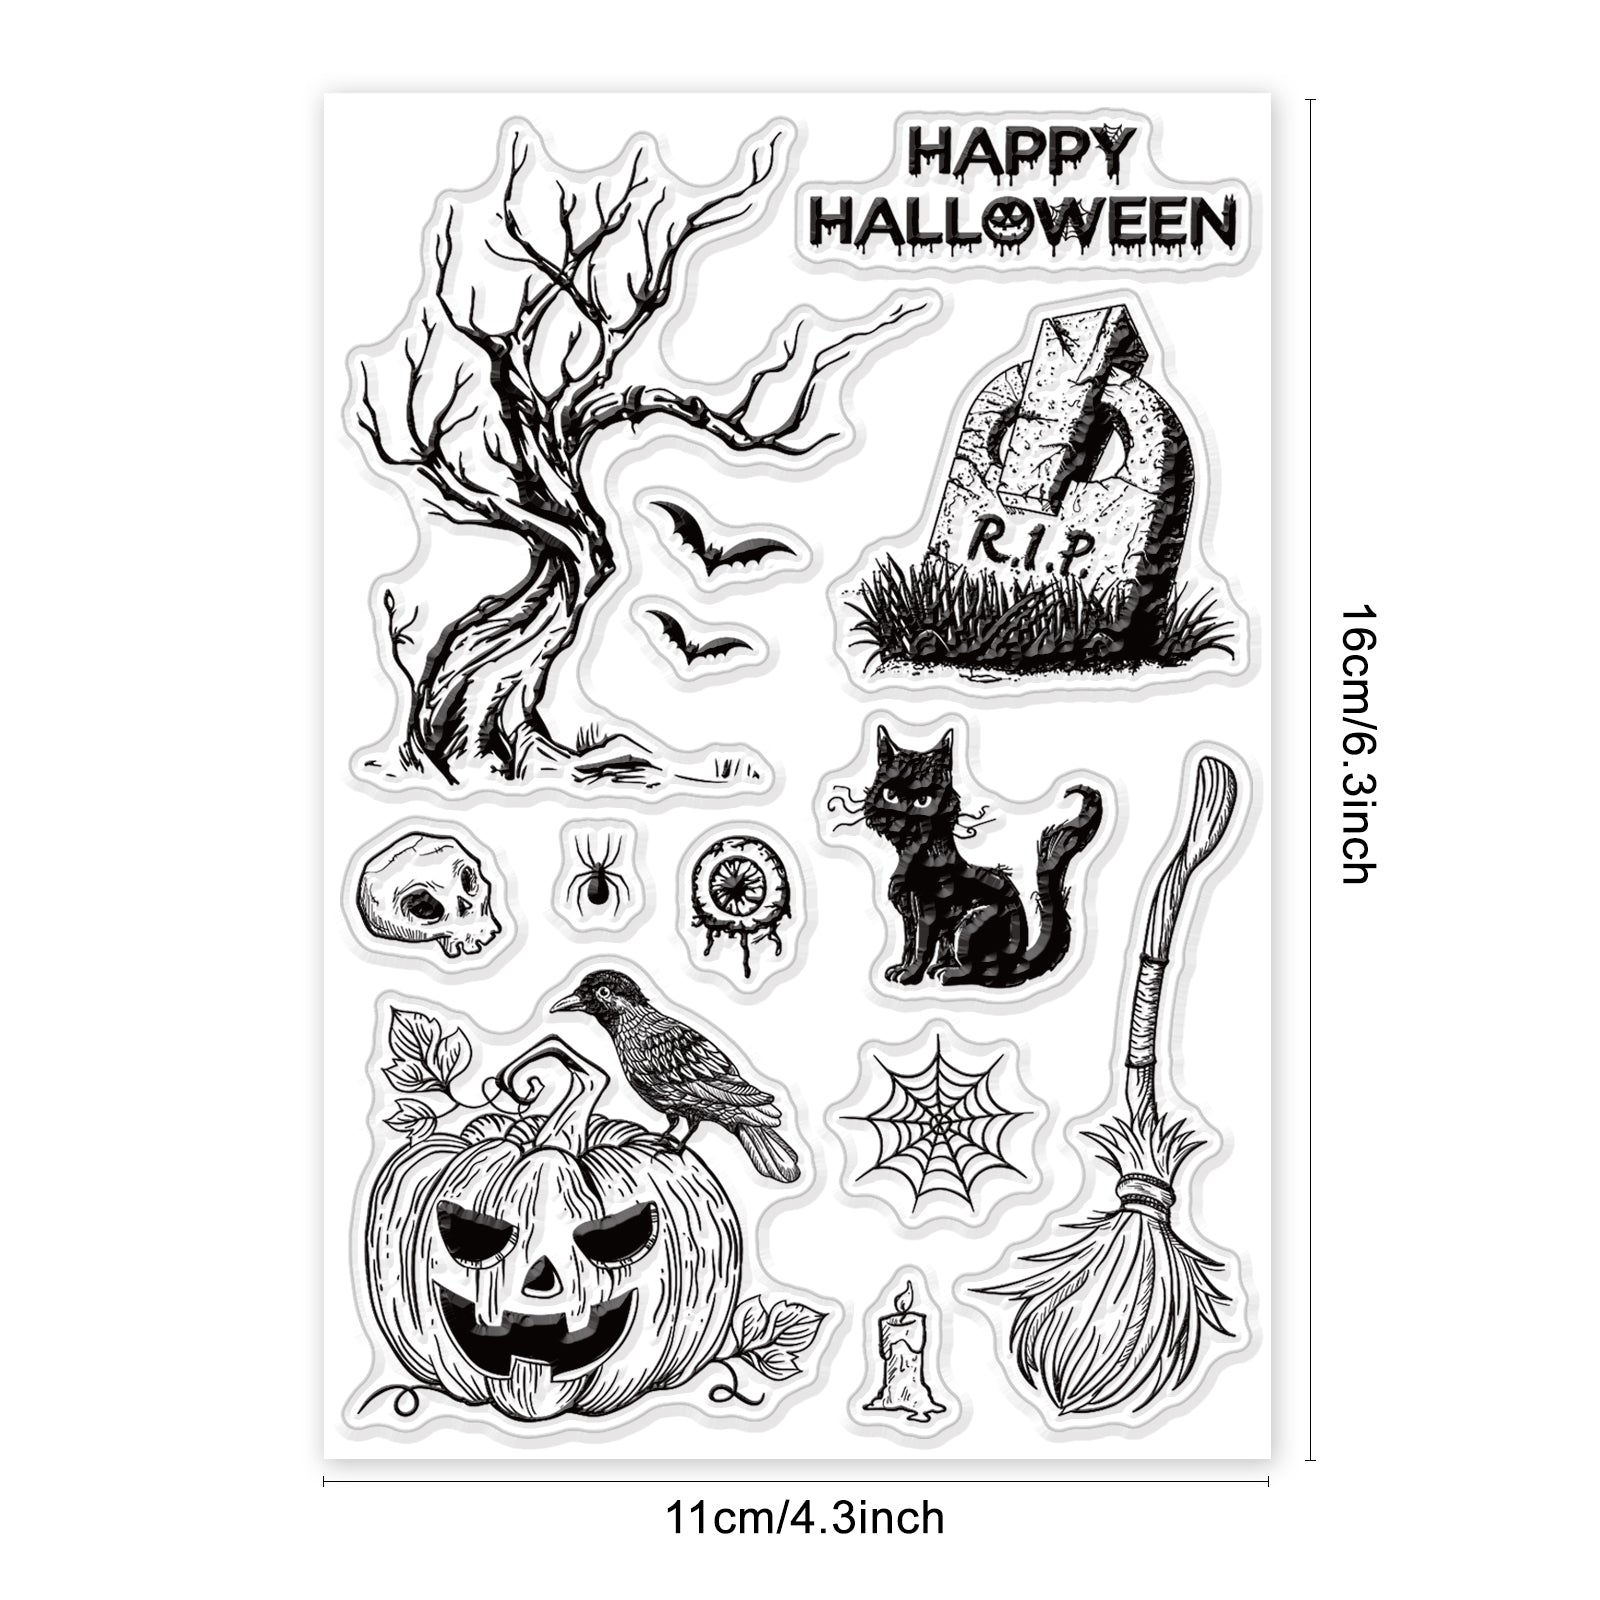 Globleland Halloween Clear Stamps, Crowd, Broom, Tombstone, Spider Web, Bat Clear Stamps Silicone Stamp Seal for Card Making Decoration and DIY Scrapbooking